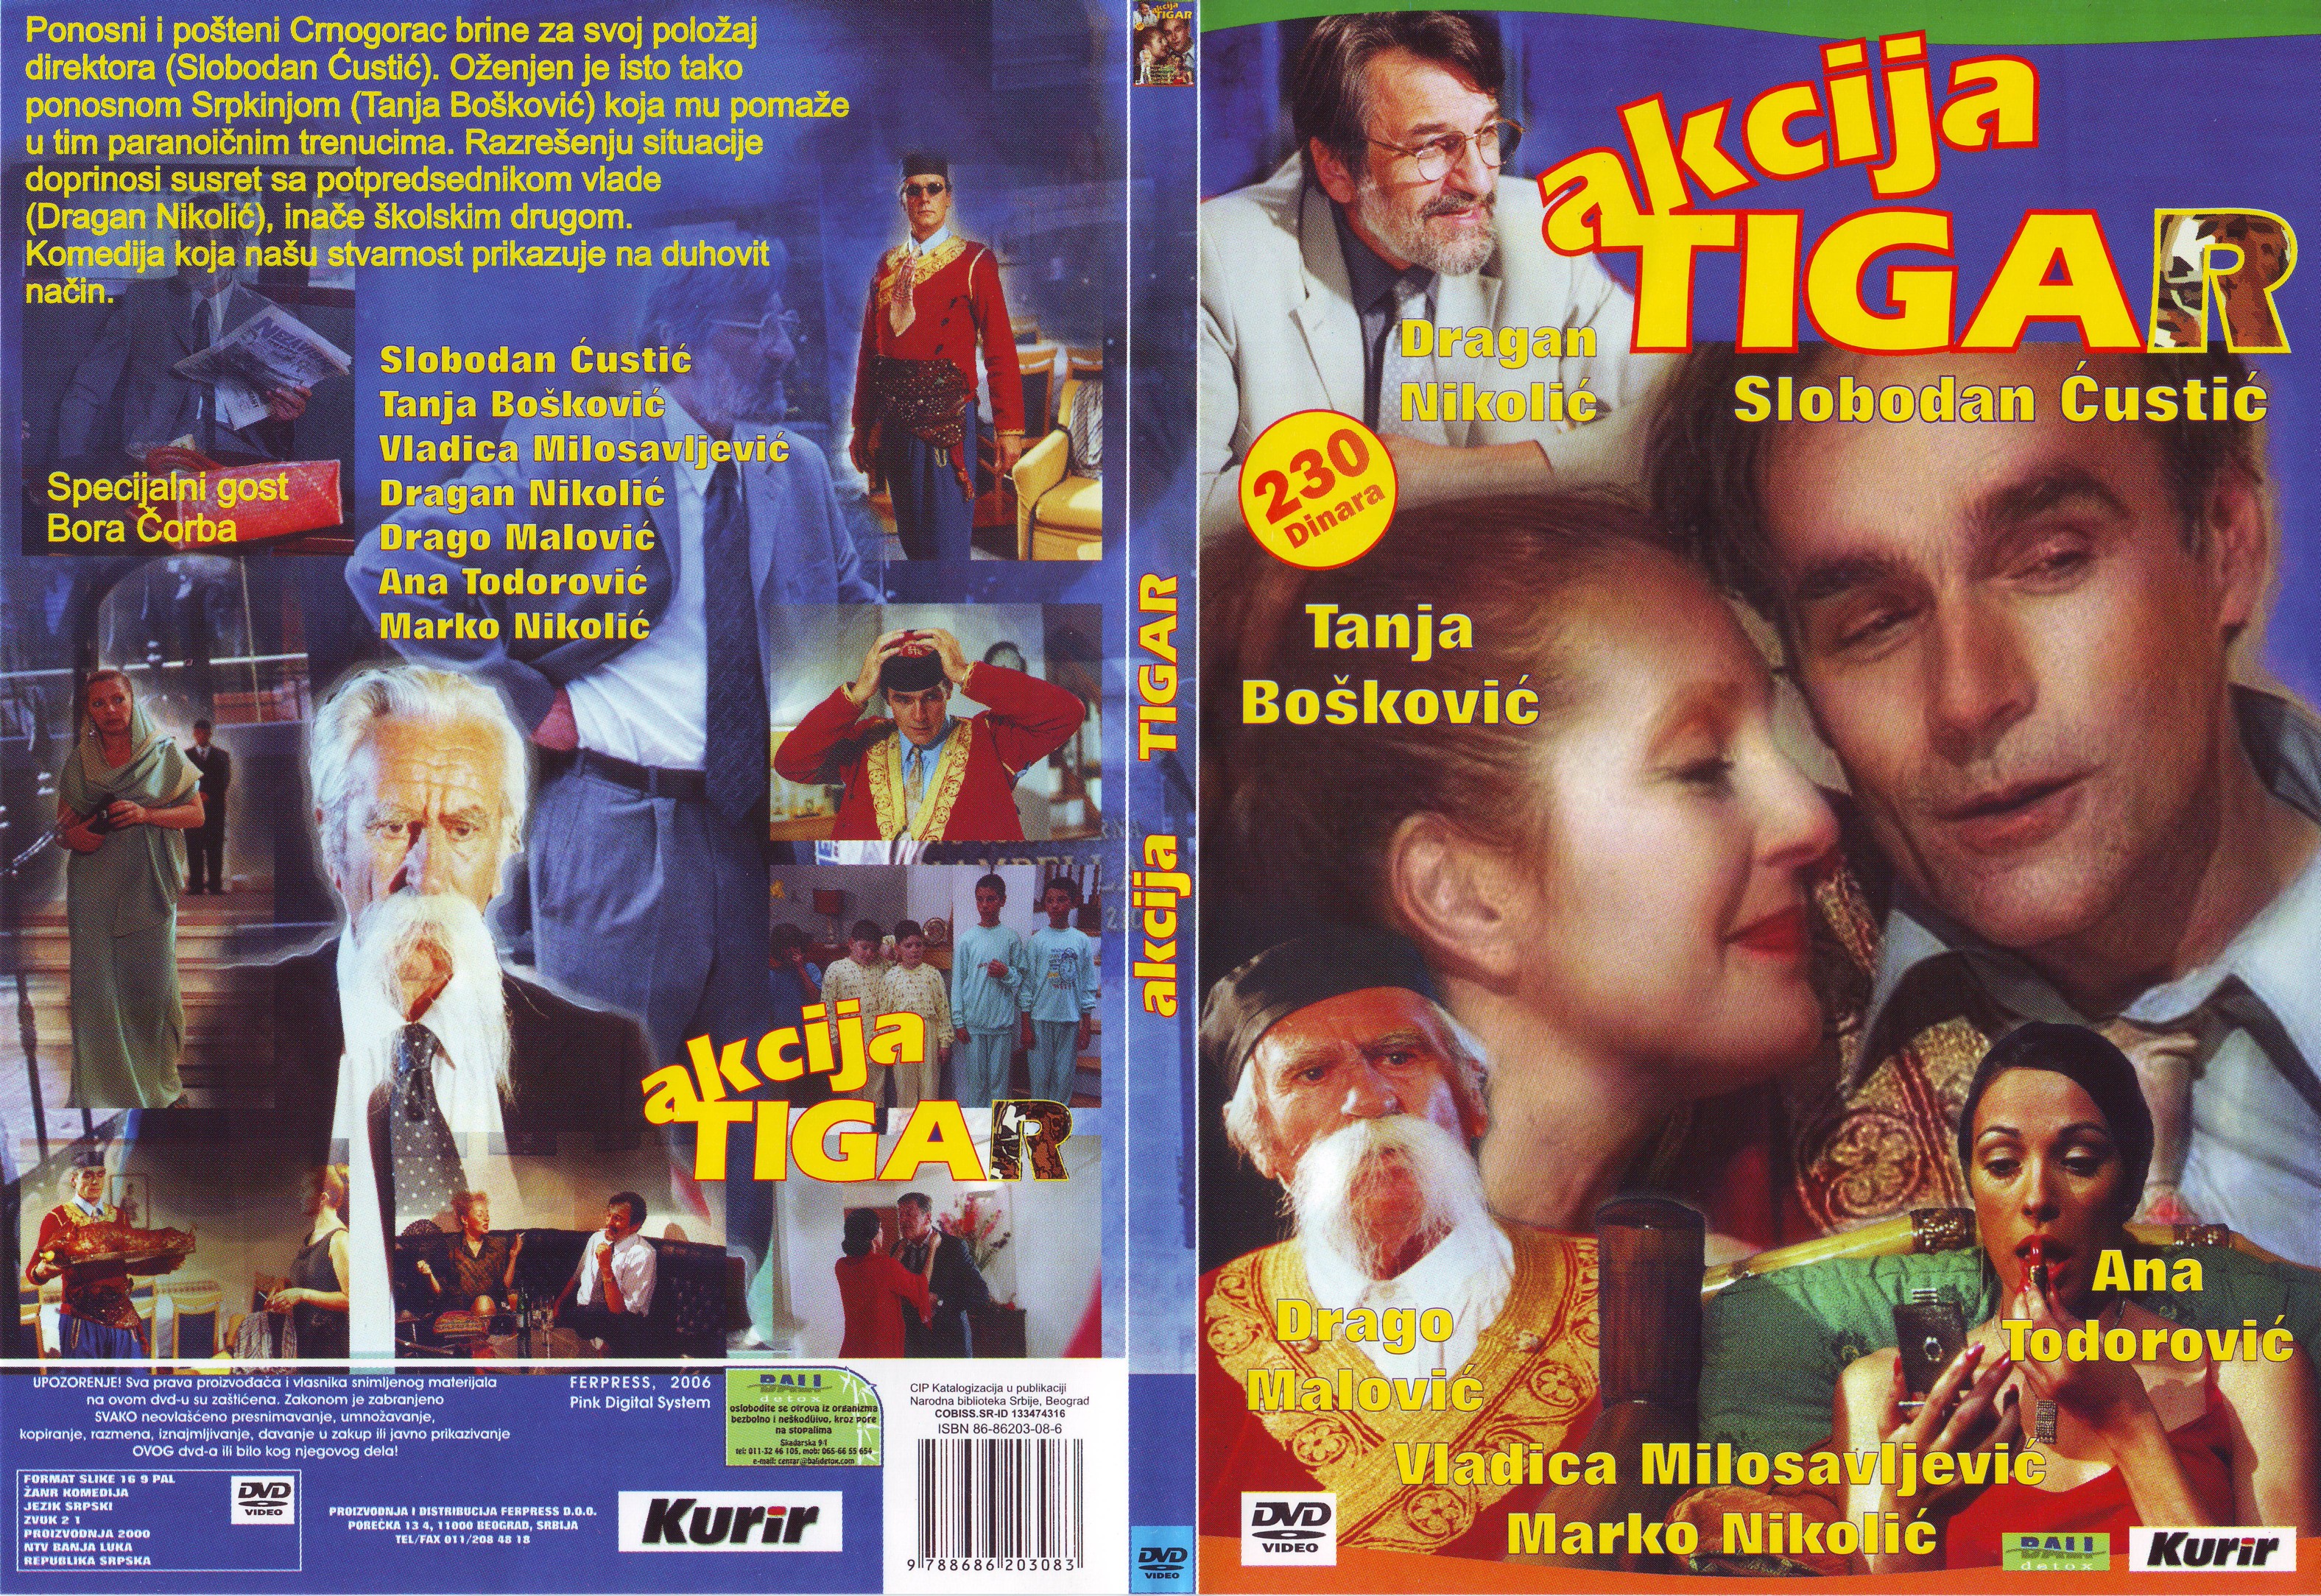 Click to view full size image -  DVD Cover - A - DVD - AKCIJA TIGAR.jpg - DVD - AKCIJA TIGAR.jpg